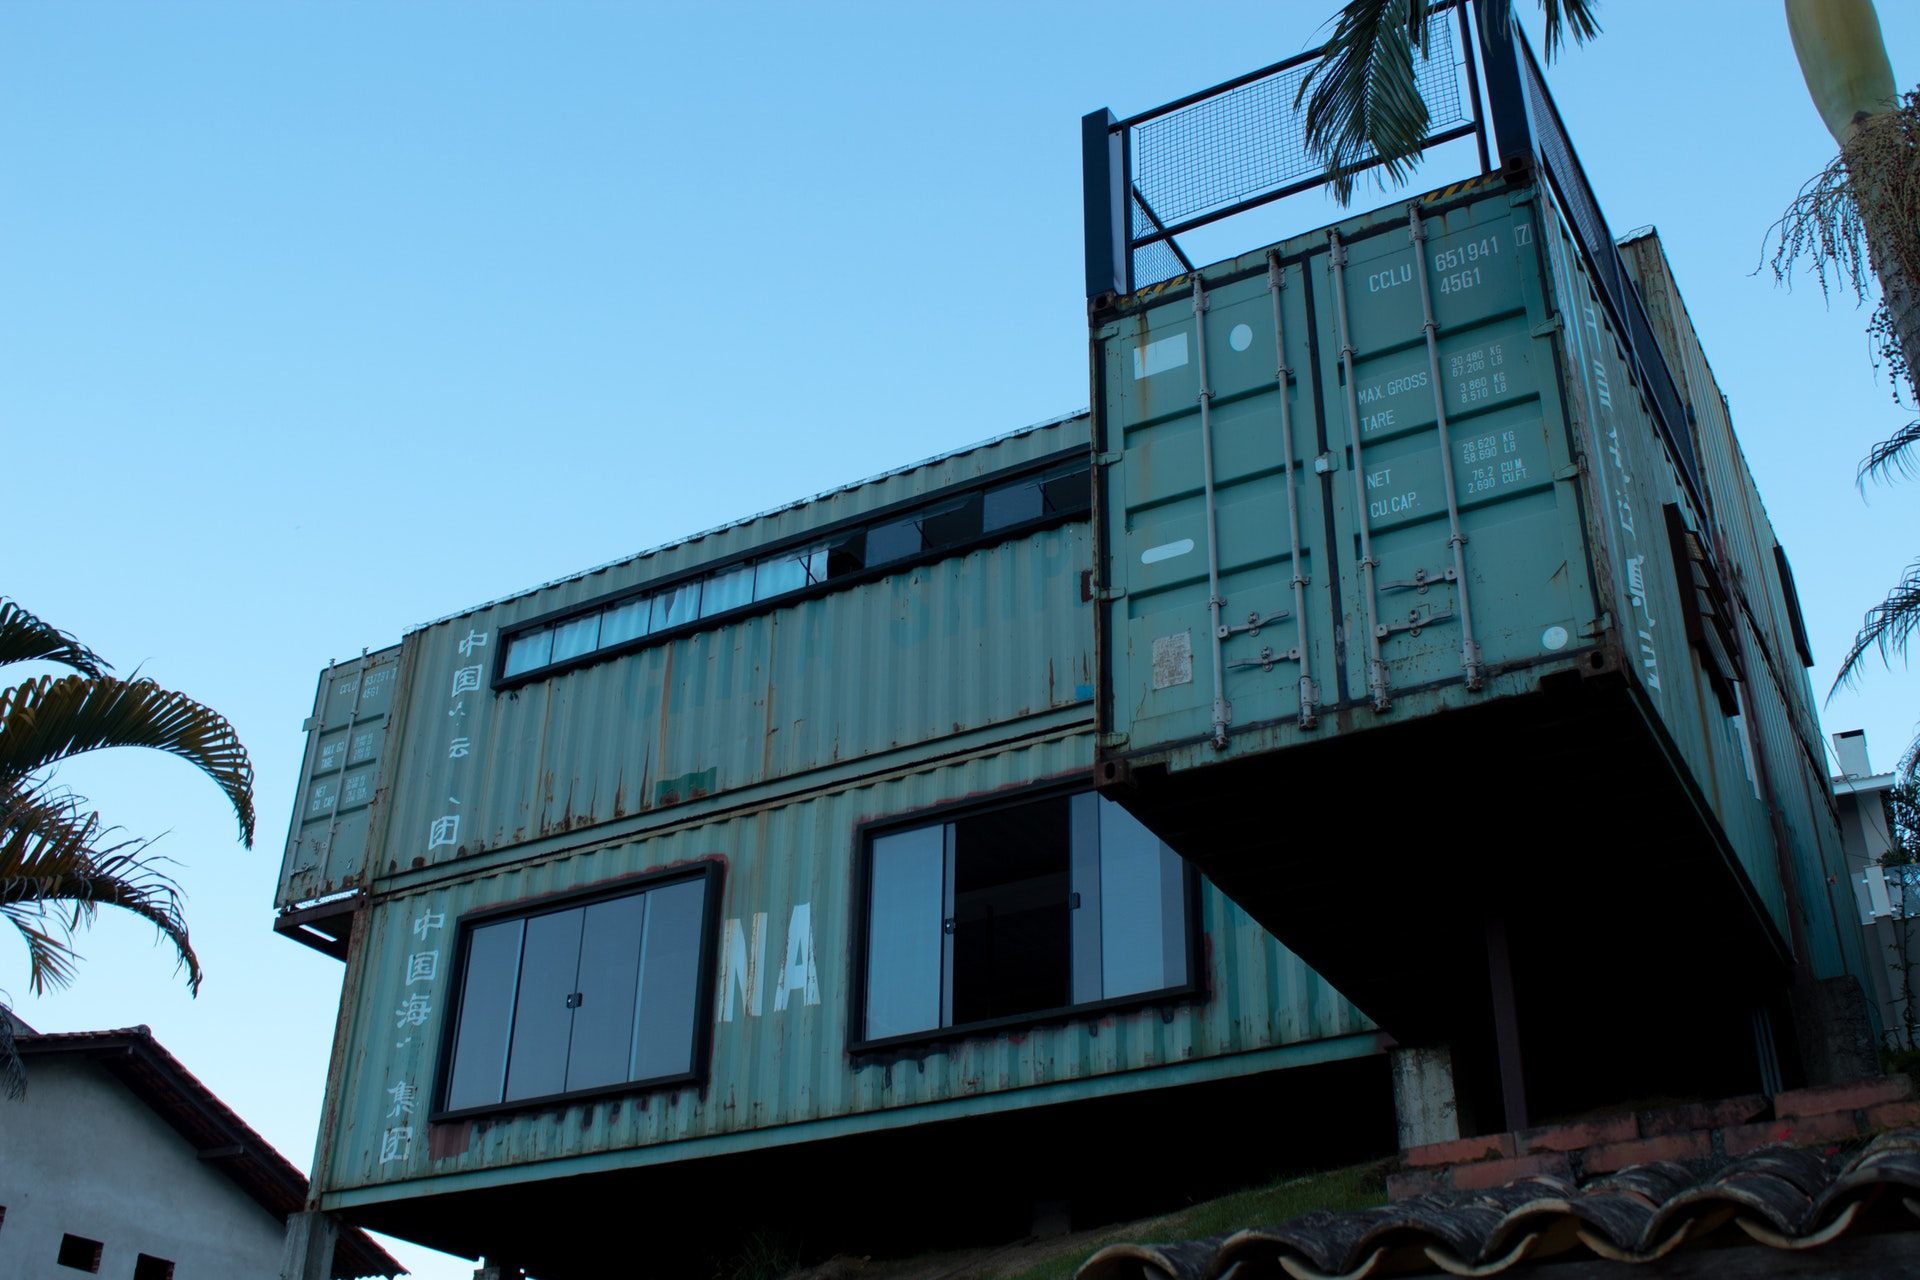 Creative use of Old Shipping Container as Home